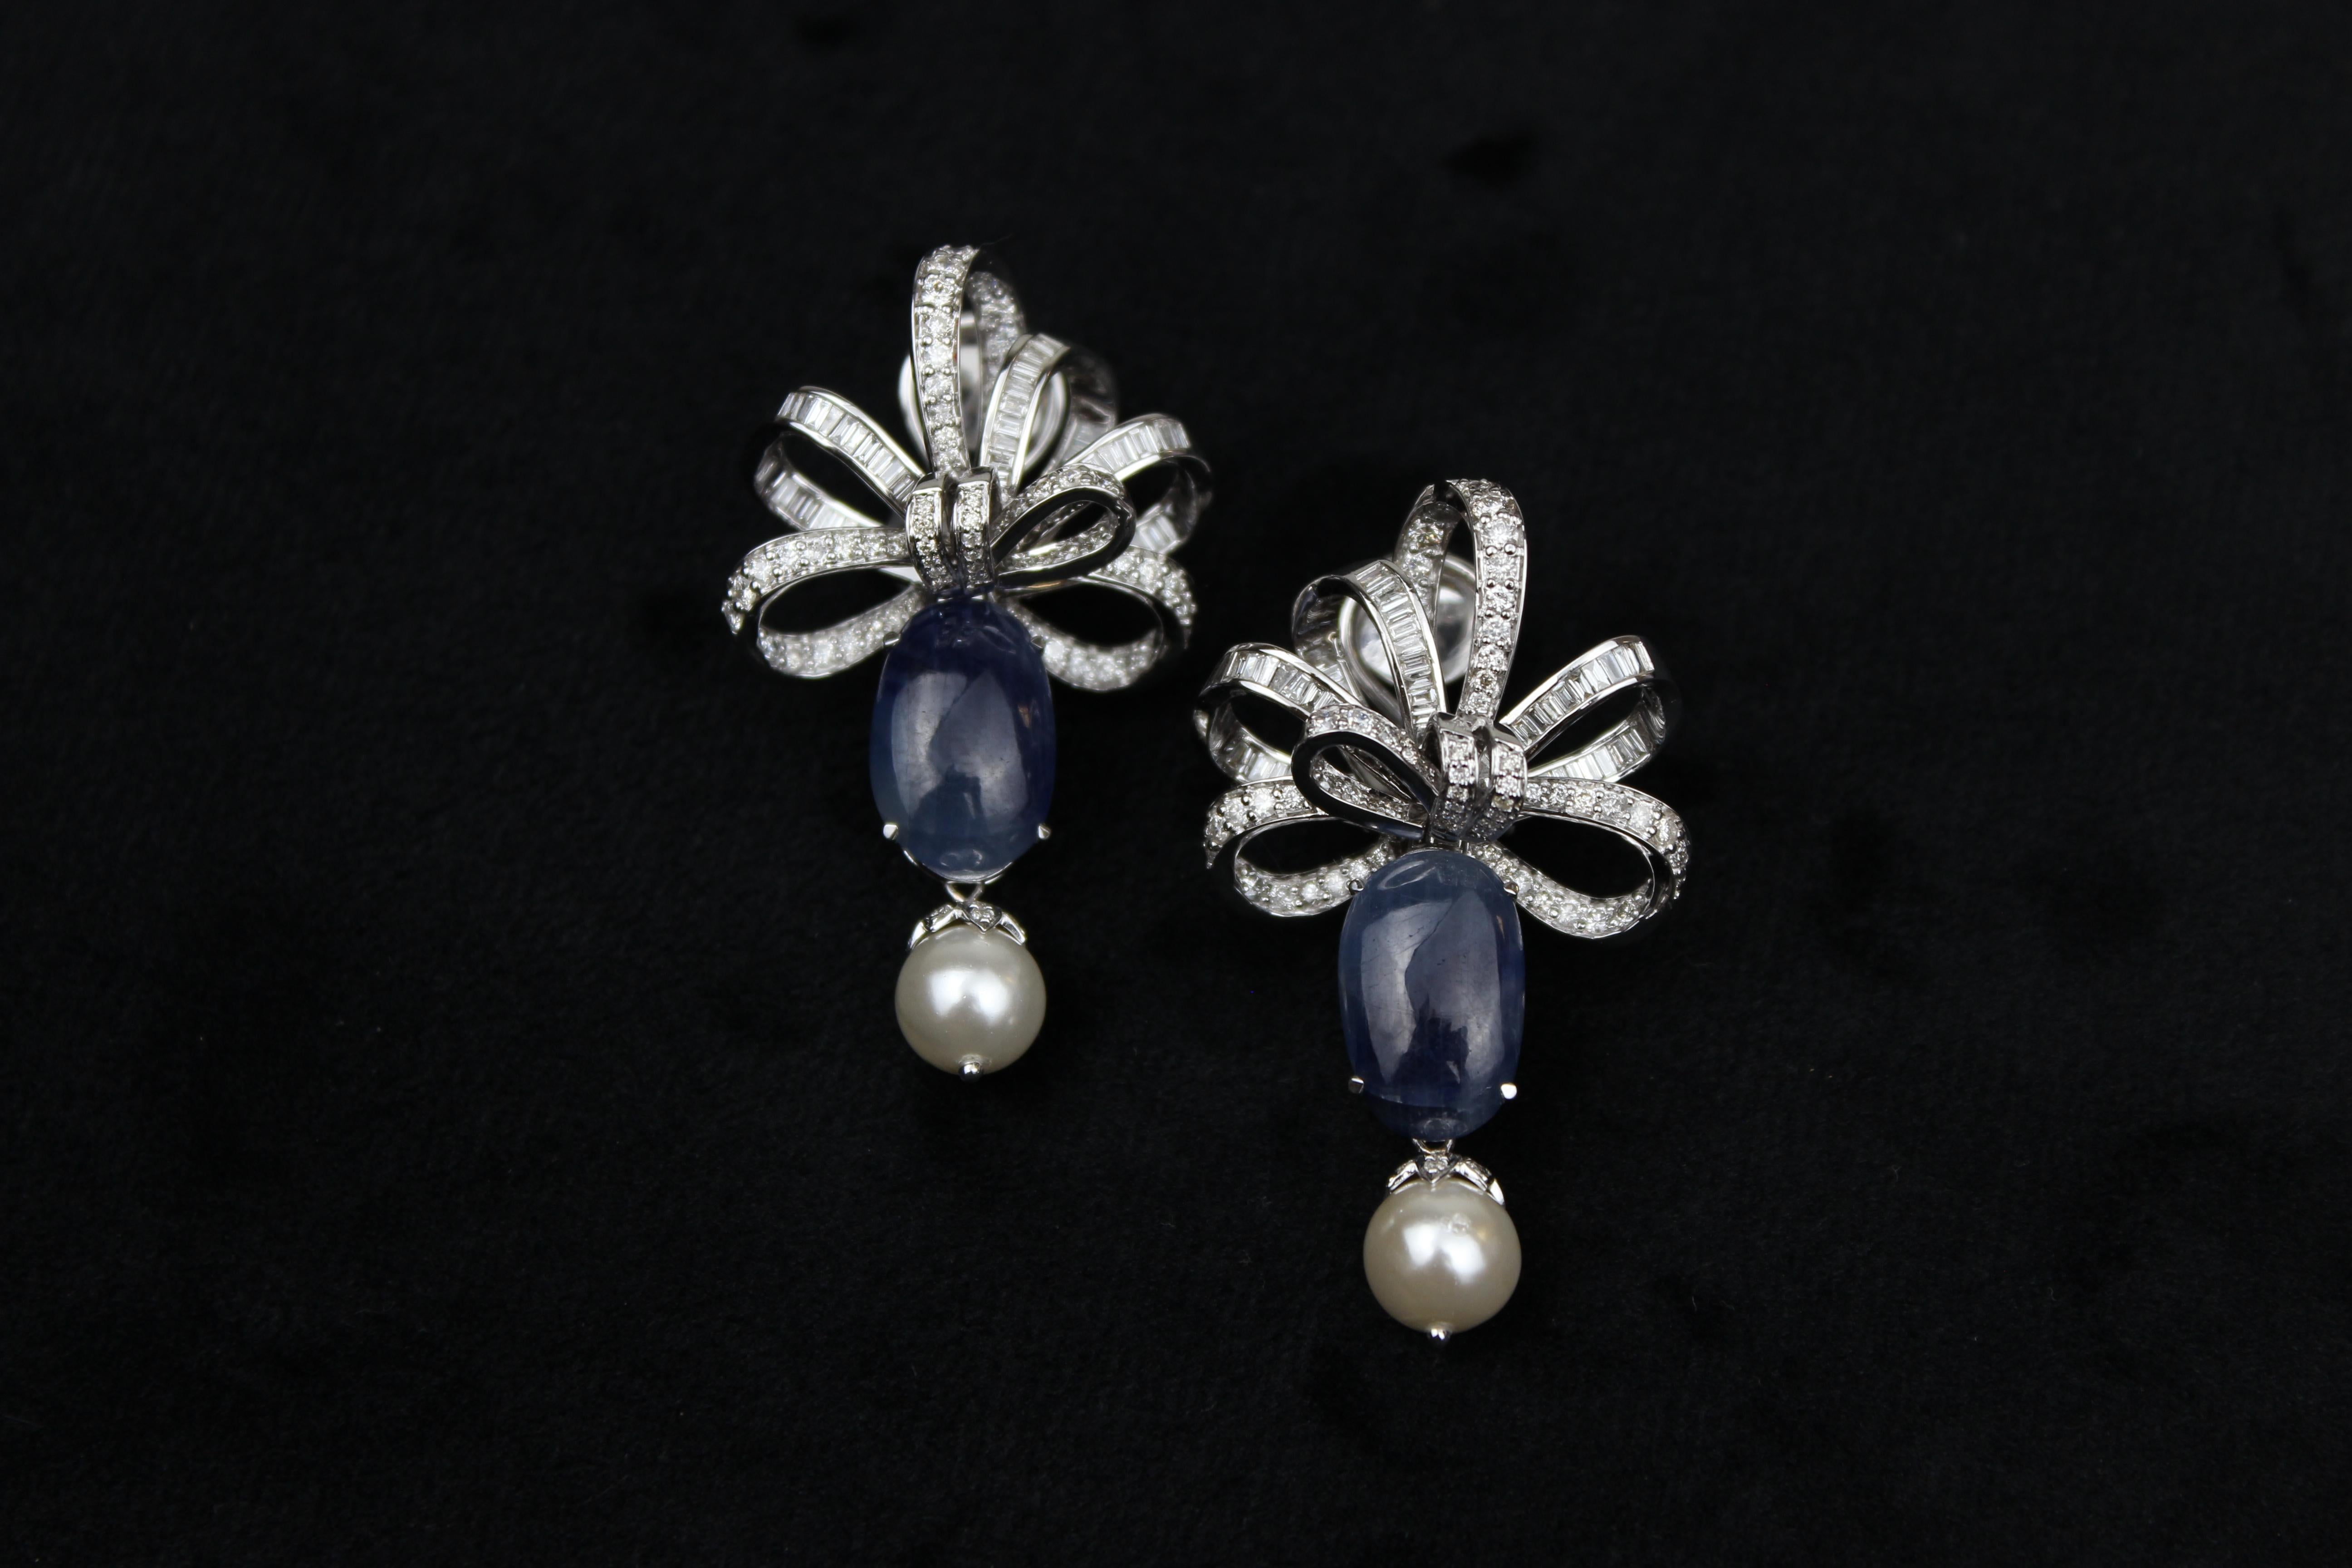 The earrings have a classic and timeless design that showcases the beautiful blue sapphire gemstones and the dangling pearls. The bow design adds a touch of femininity and elegance to the overall look of the earrings, creating a unique and